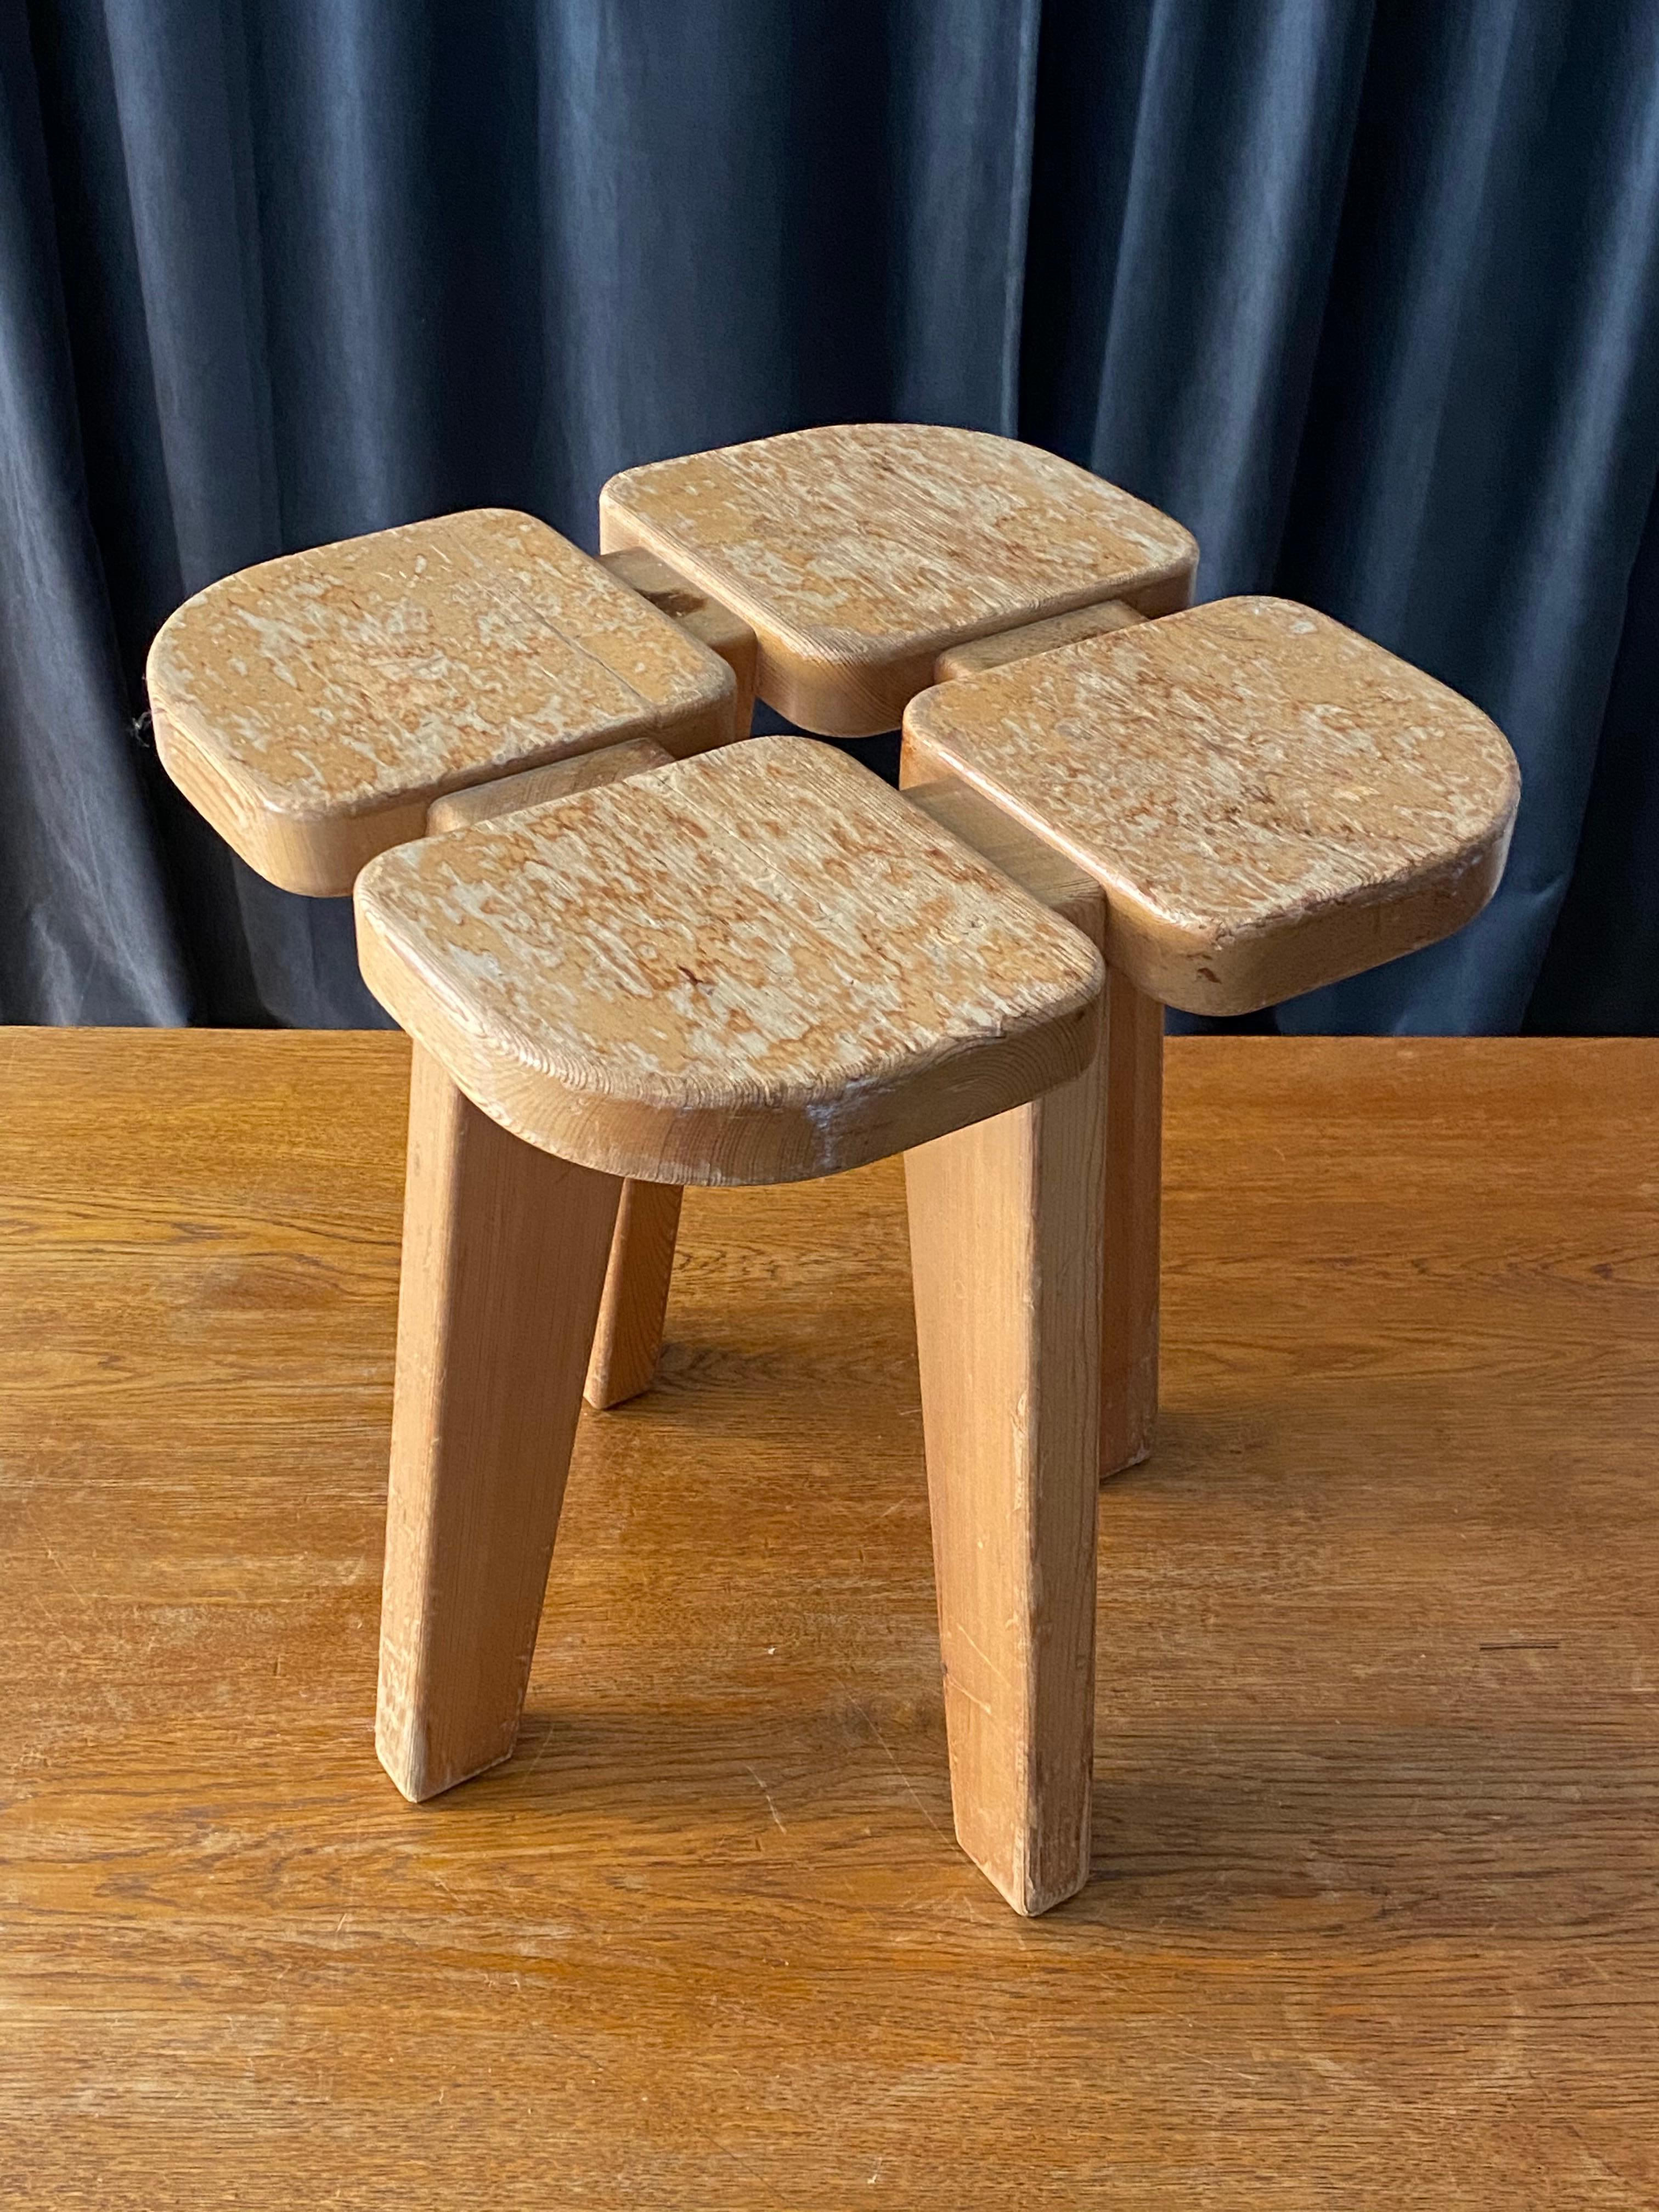 A highly functionalist stool, designed by finnish Lisa Johansson-Pape, produced by Kervo Snickerifabrik for Oy Stockmann Ab, 1970s. In lacquered pine.

Other designers working in similar functionalist ethos include Pierre Jeanneret, Pierre Chapo,